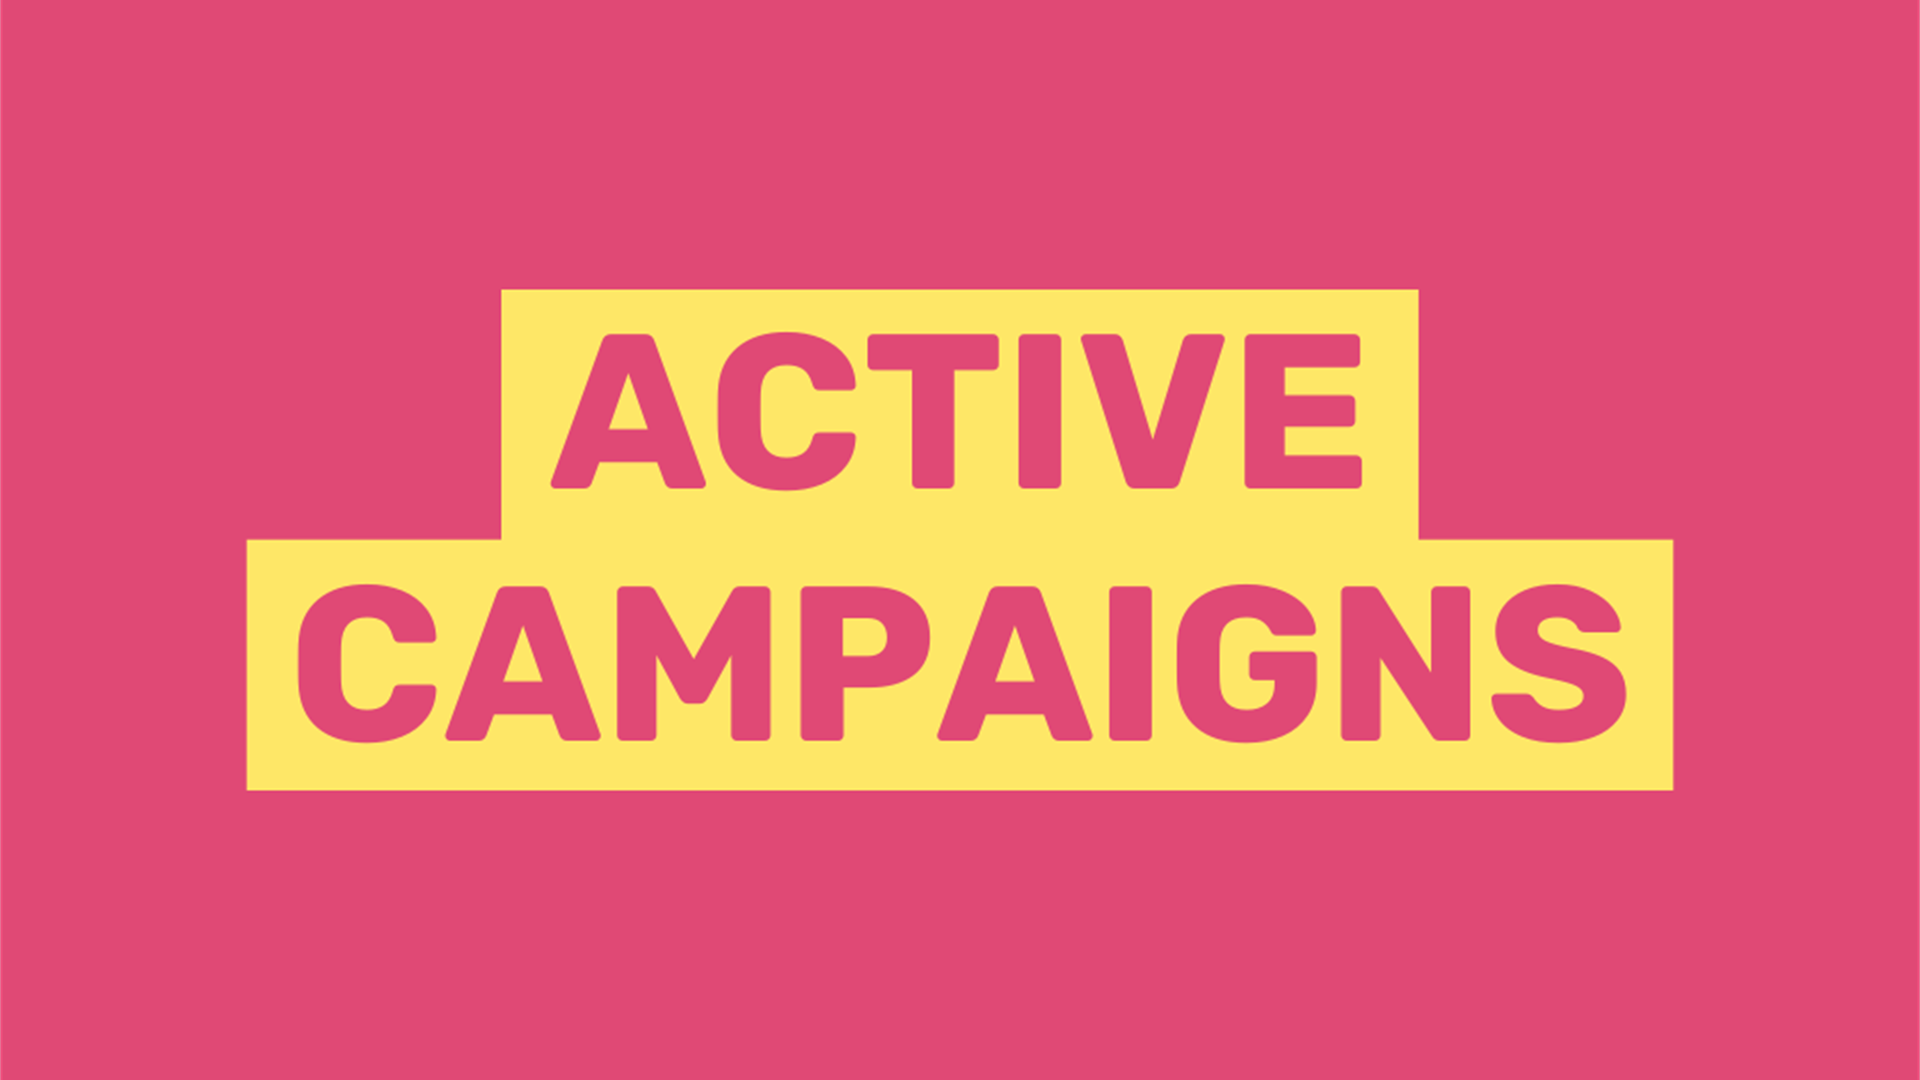 Find out more about what we're doing right now to make student life better at UAL and see how you can get involved. You can also join one of our active campaign groups!